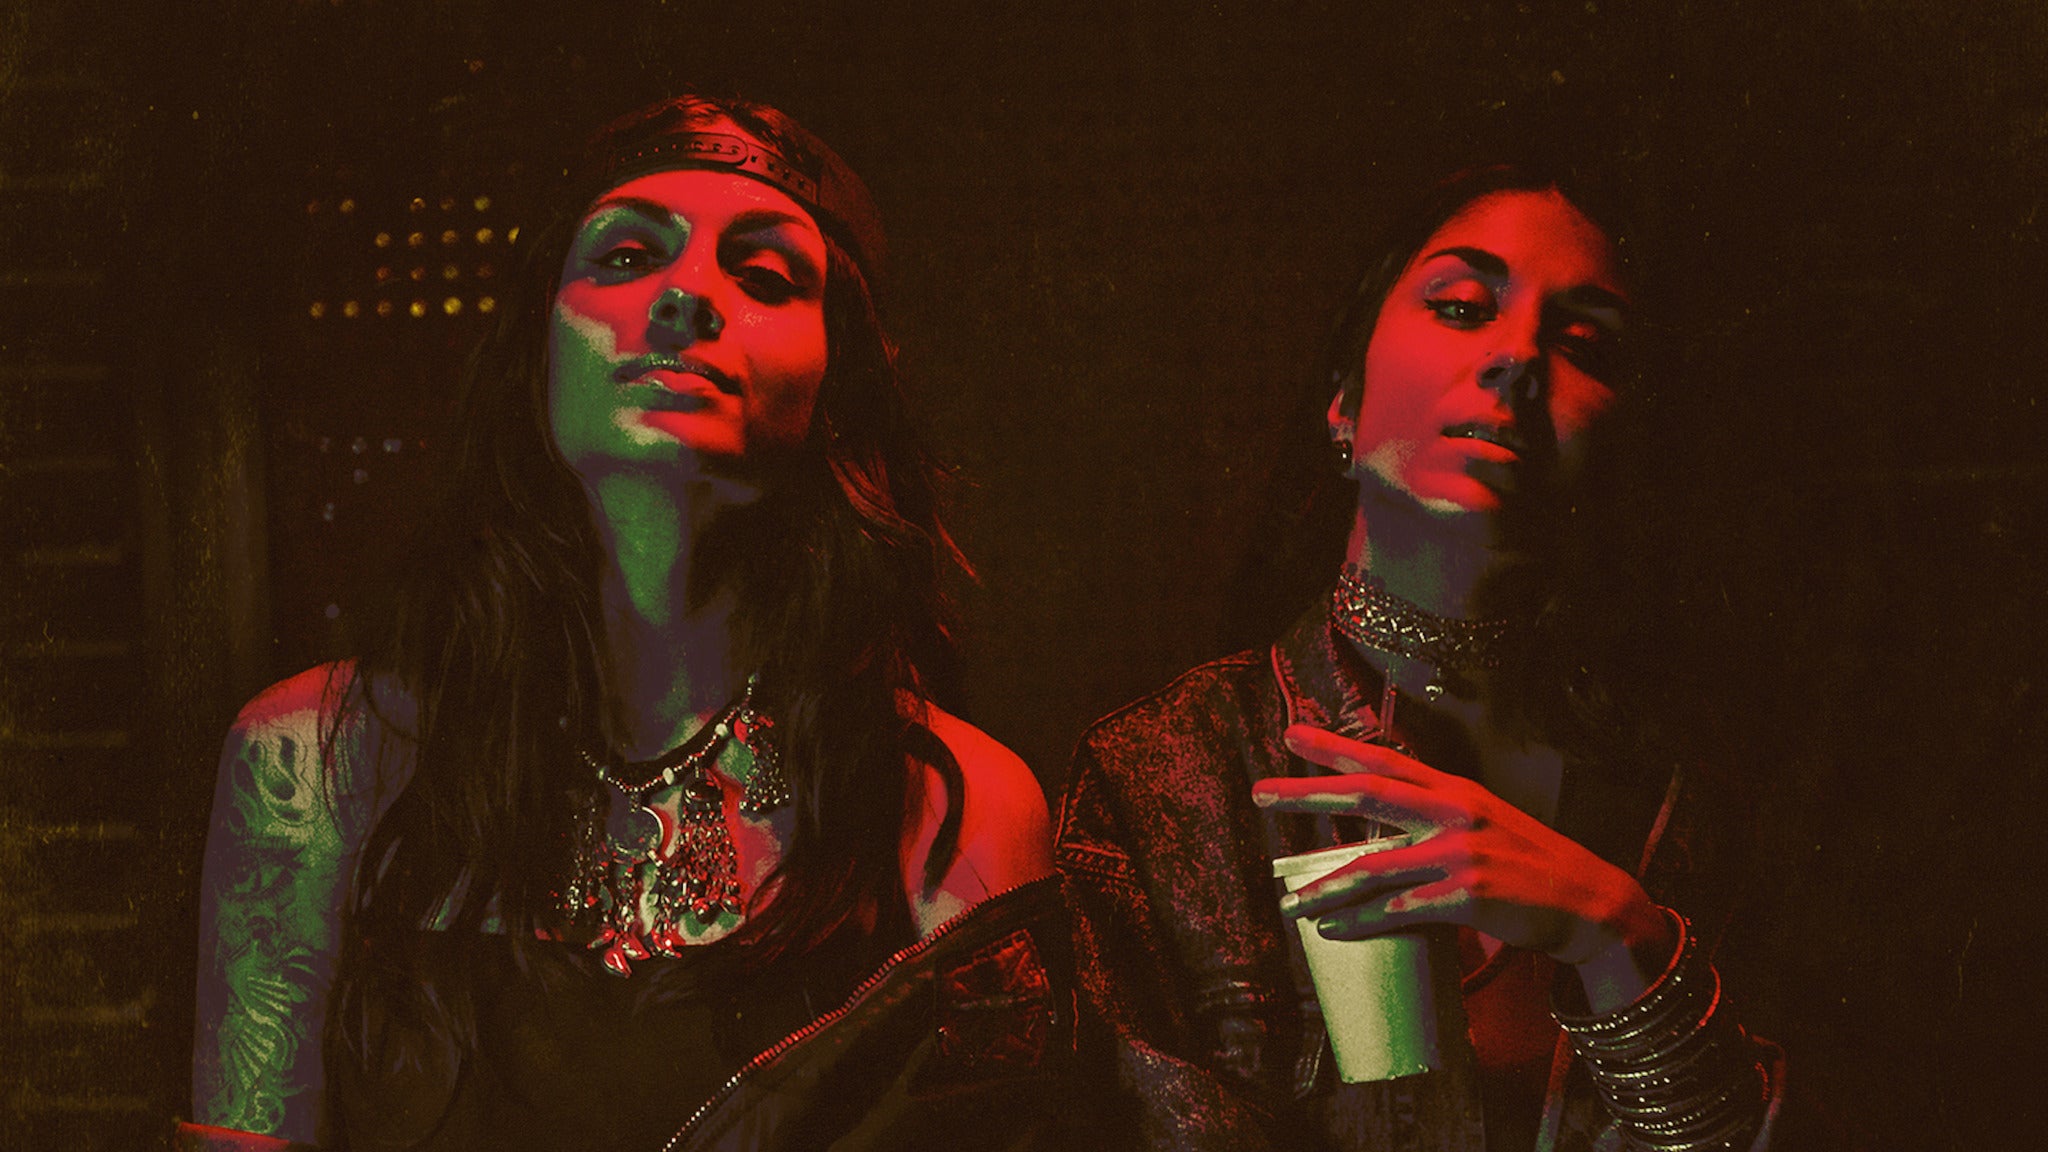 Krewella - New World Tour presented by SiriusXM BPM in Chicago promo photo for Citi® Cardmember presale offer code